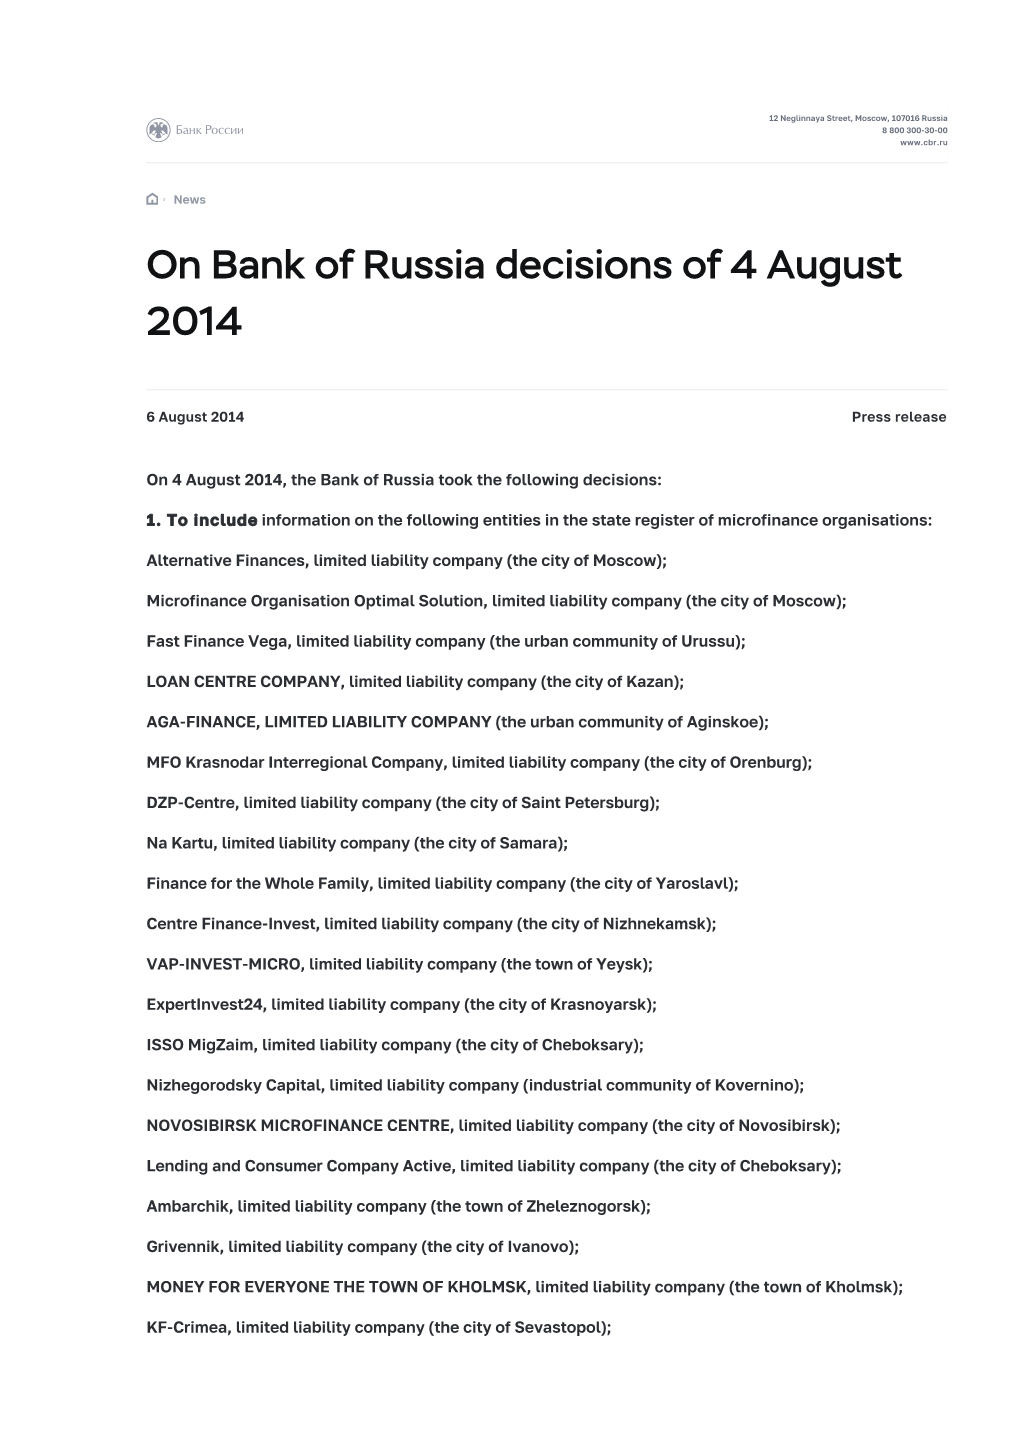 On Bank of Russia Decisions of 4 August 2014 | Bank of Russia